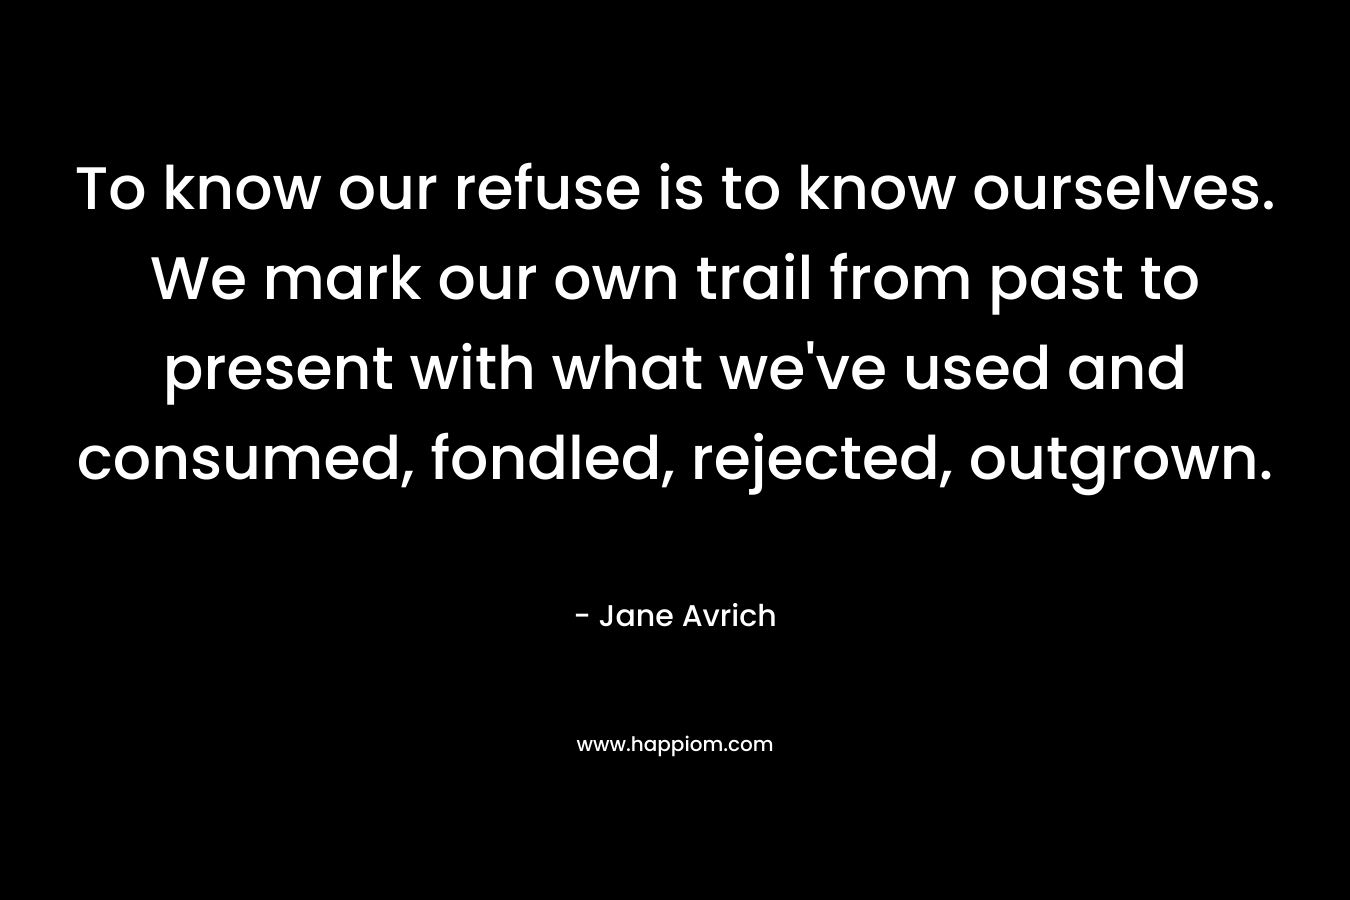 To know our refuse is to know ourselves. We mark our own trail from past to present with what we’ve used and consumed, fondled, rejected, outgrown. – Jane Avrich